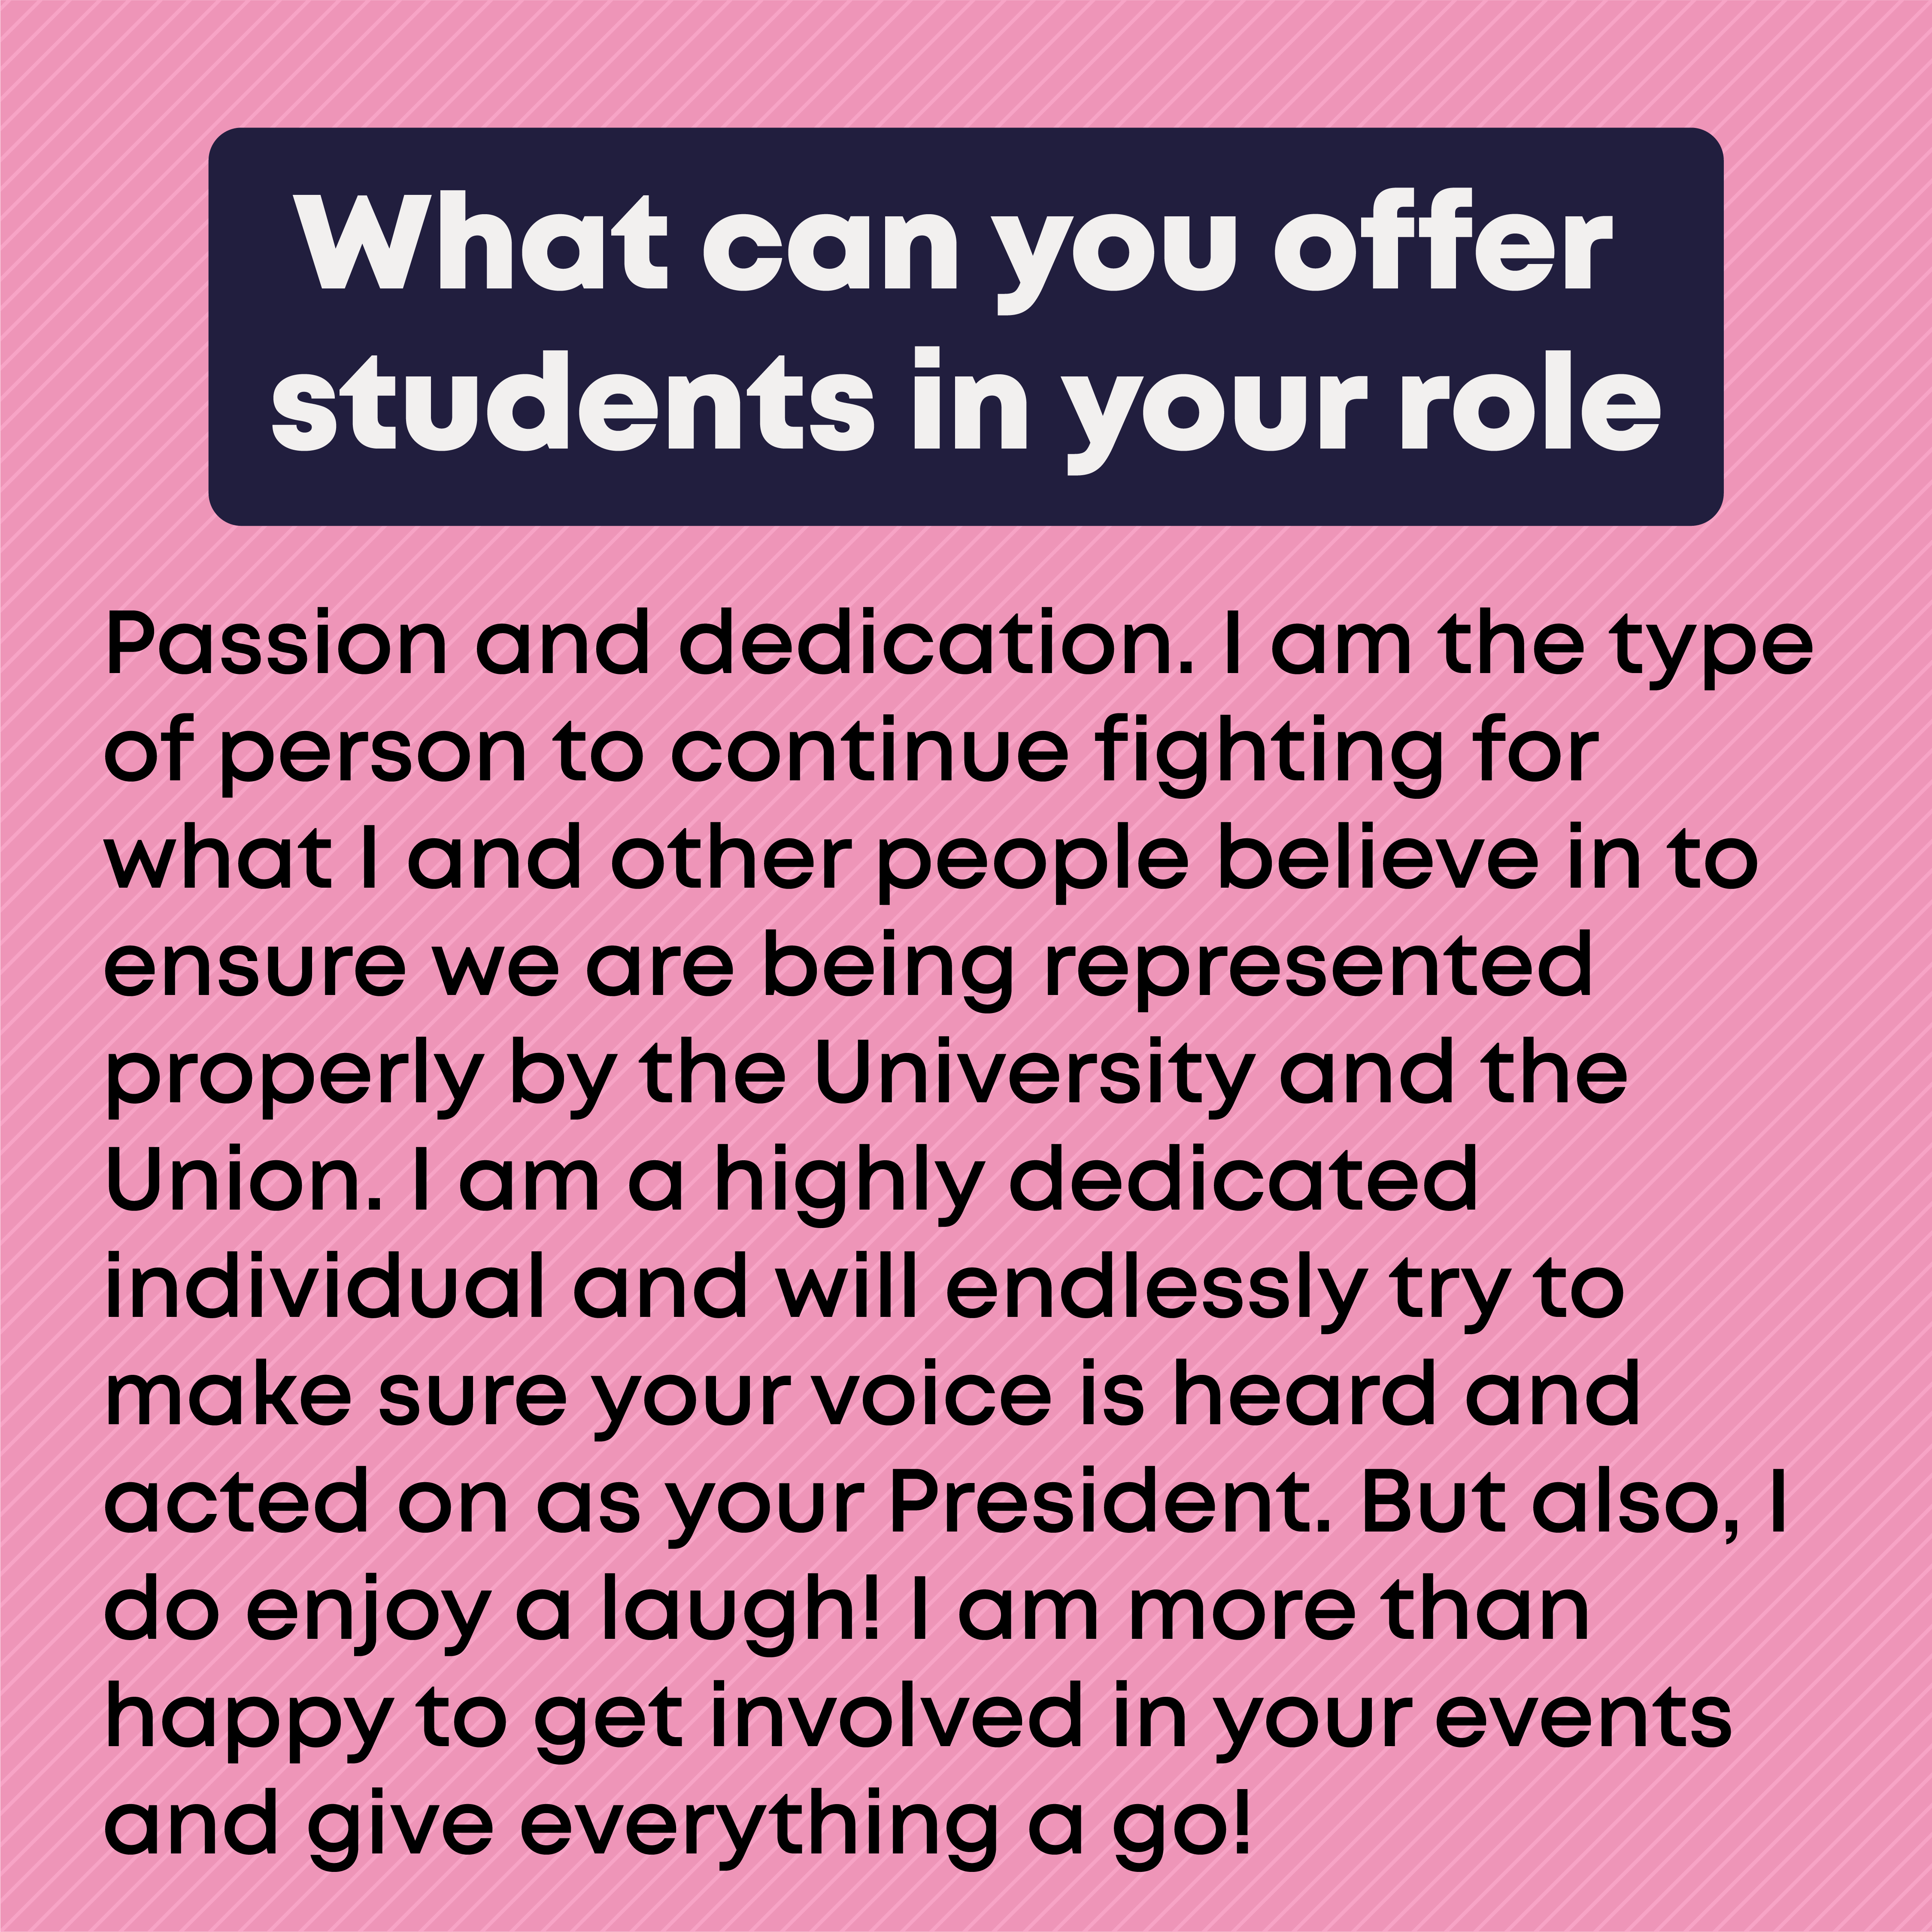 What can you offer students in your role? Passion and dedication. I am the type of person to continue fighting for what I and other people believe in to ensure we are being represented properly by the University and the Union. I am a highly dedicated individual and will endlessly try to make sure your voice is heard and acted on as your President. But also, I do enjoy a laugh! I am more than happy to get involved in your events and give everything a go!